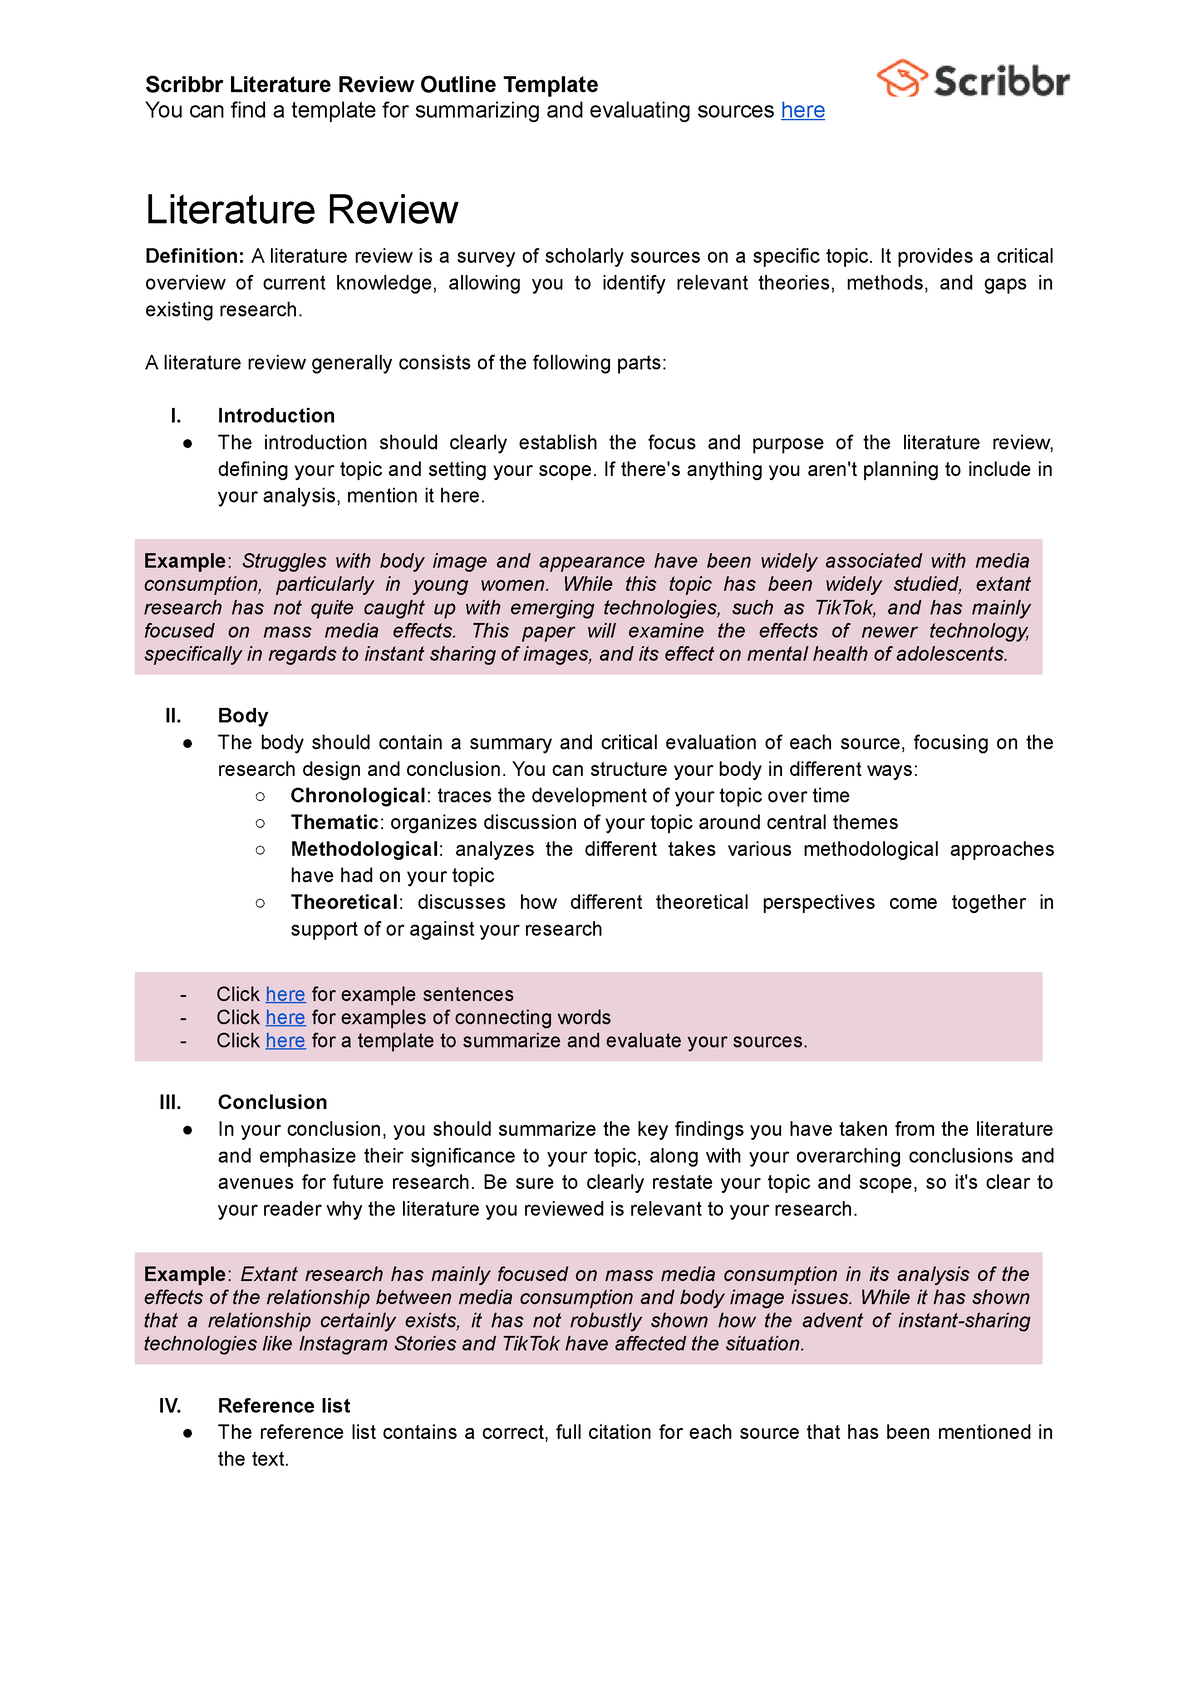 week 3 literature review part 1 outline and references